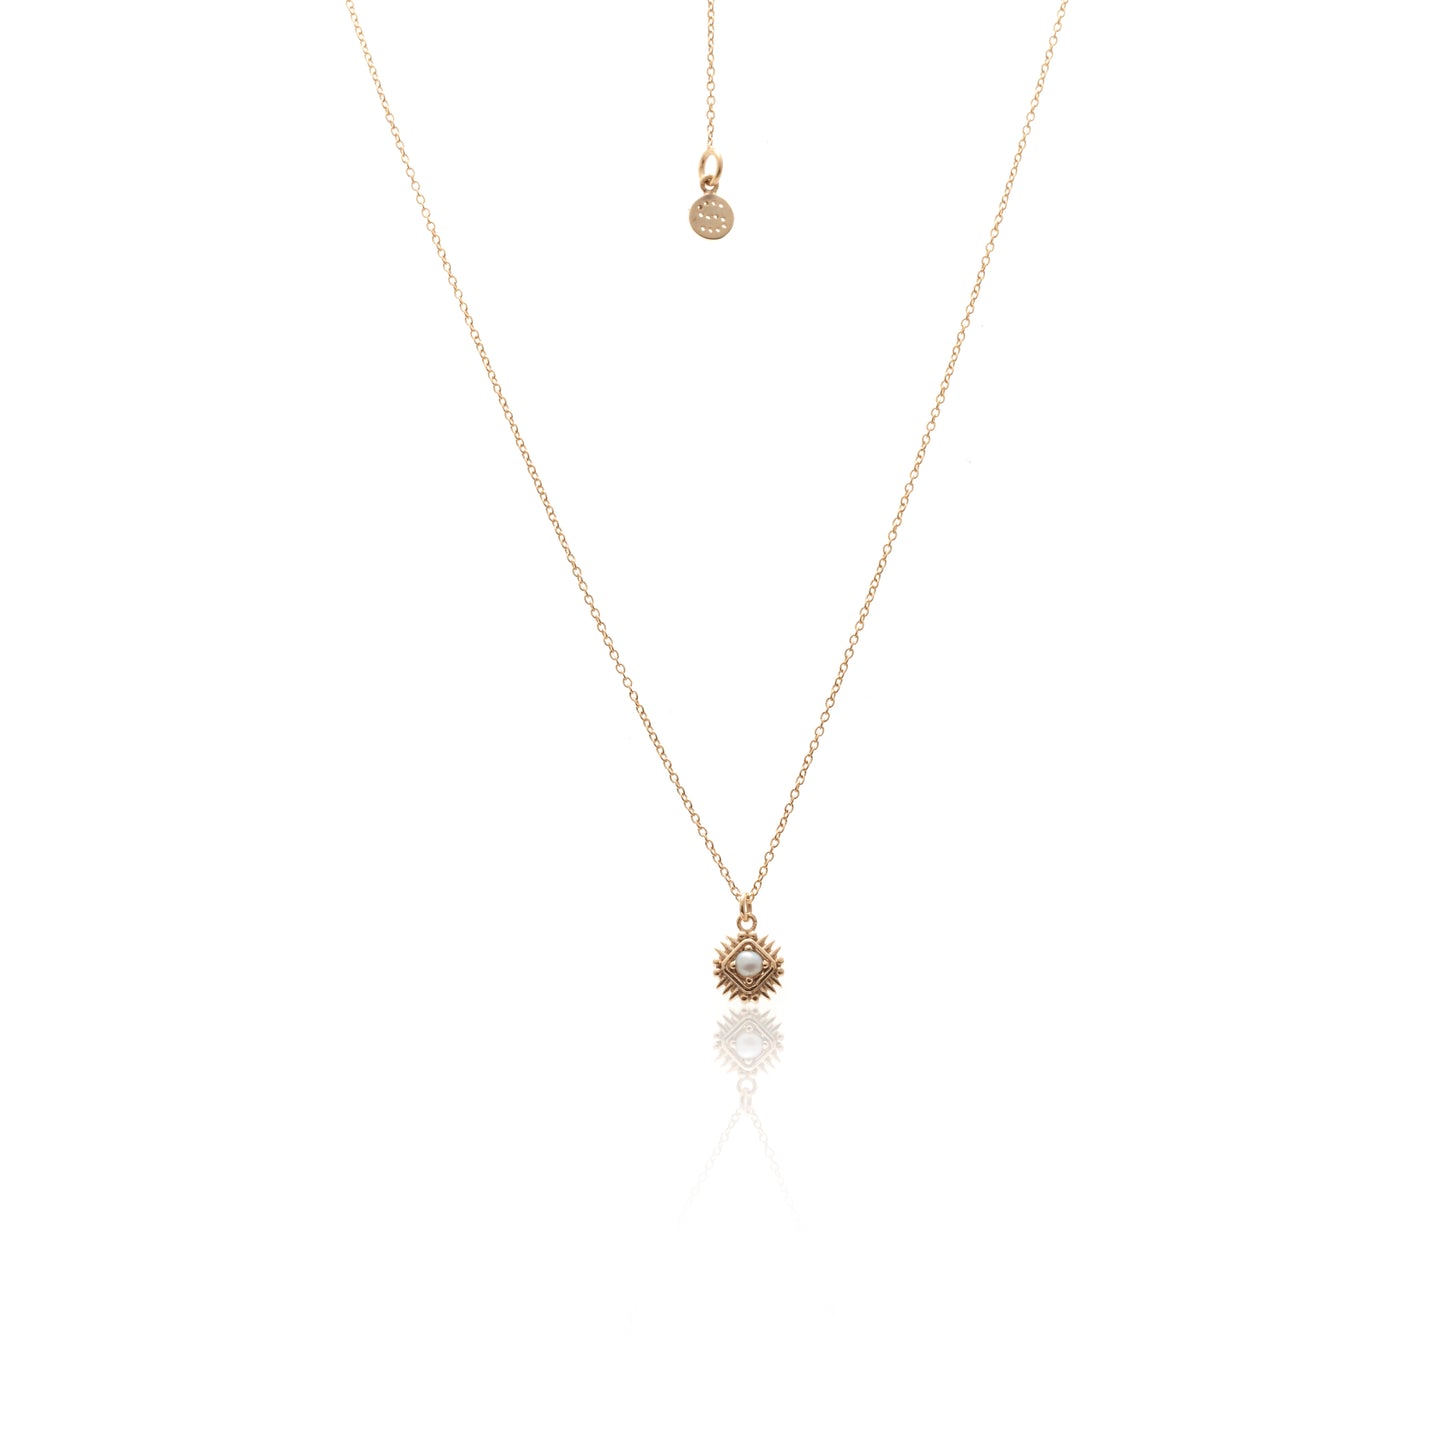 Petite Perle Necklace By Silk & Steel - Pearl/Gold